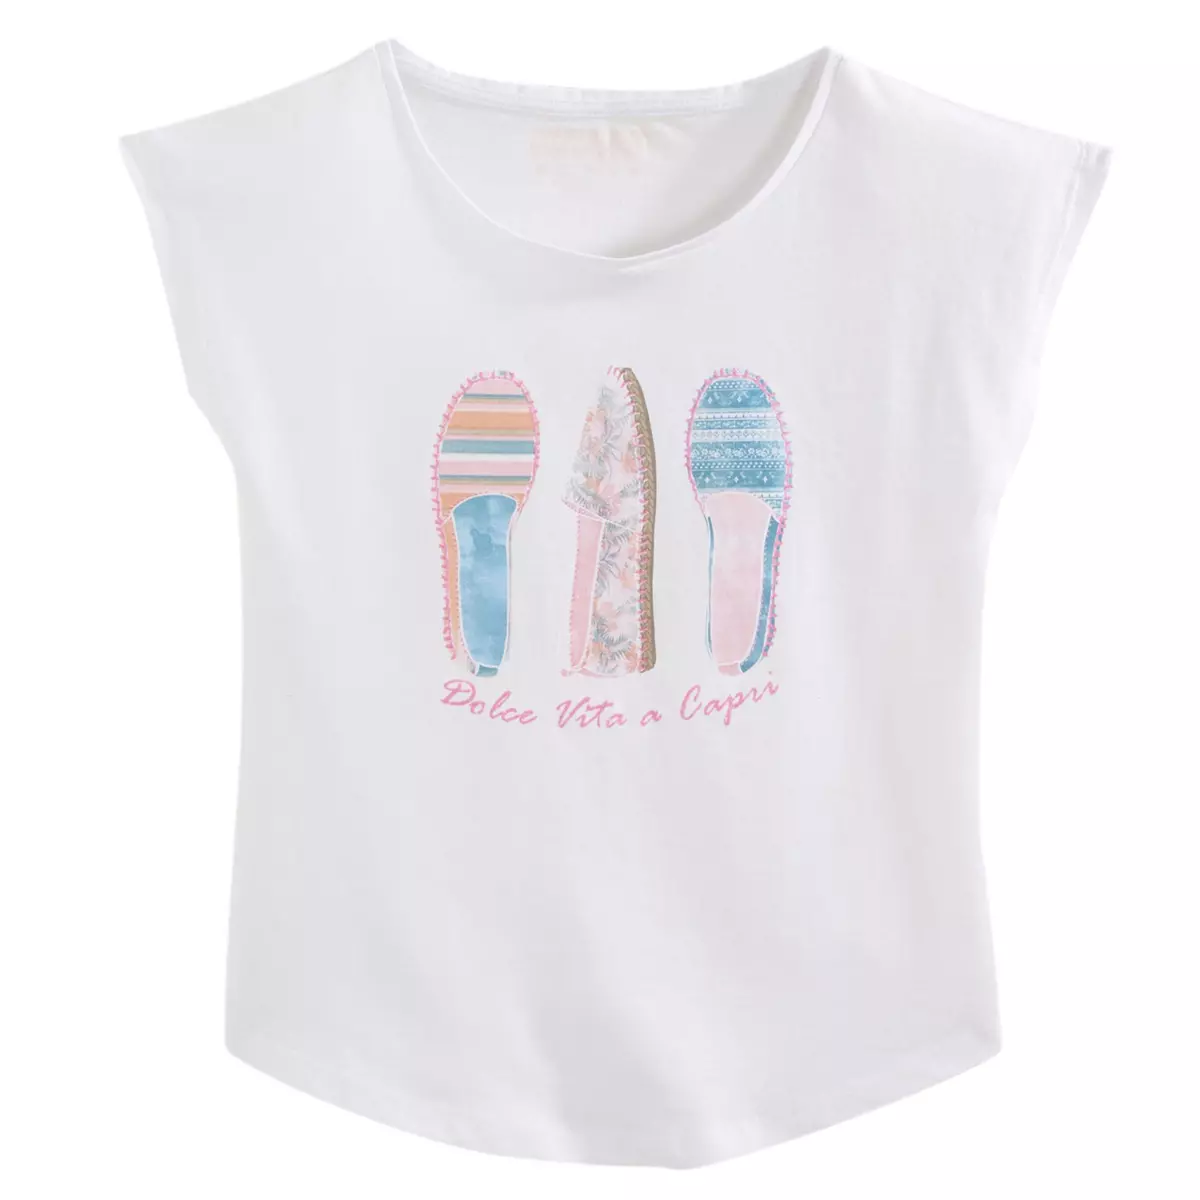 IN EXTENSO Tee shirt manches courtes fille